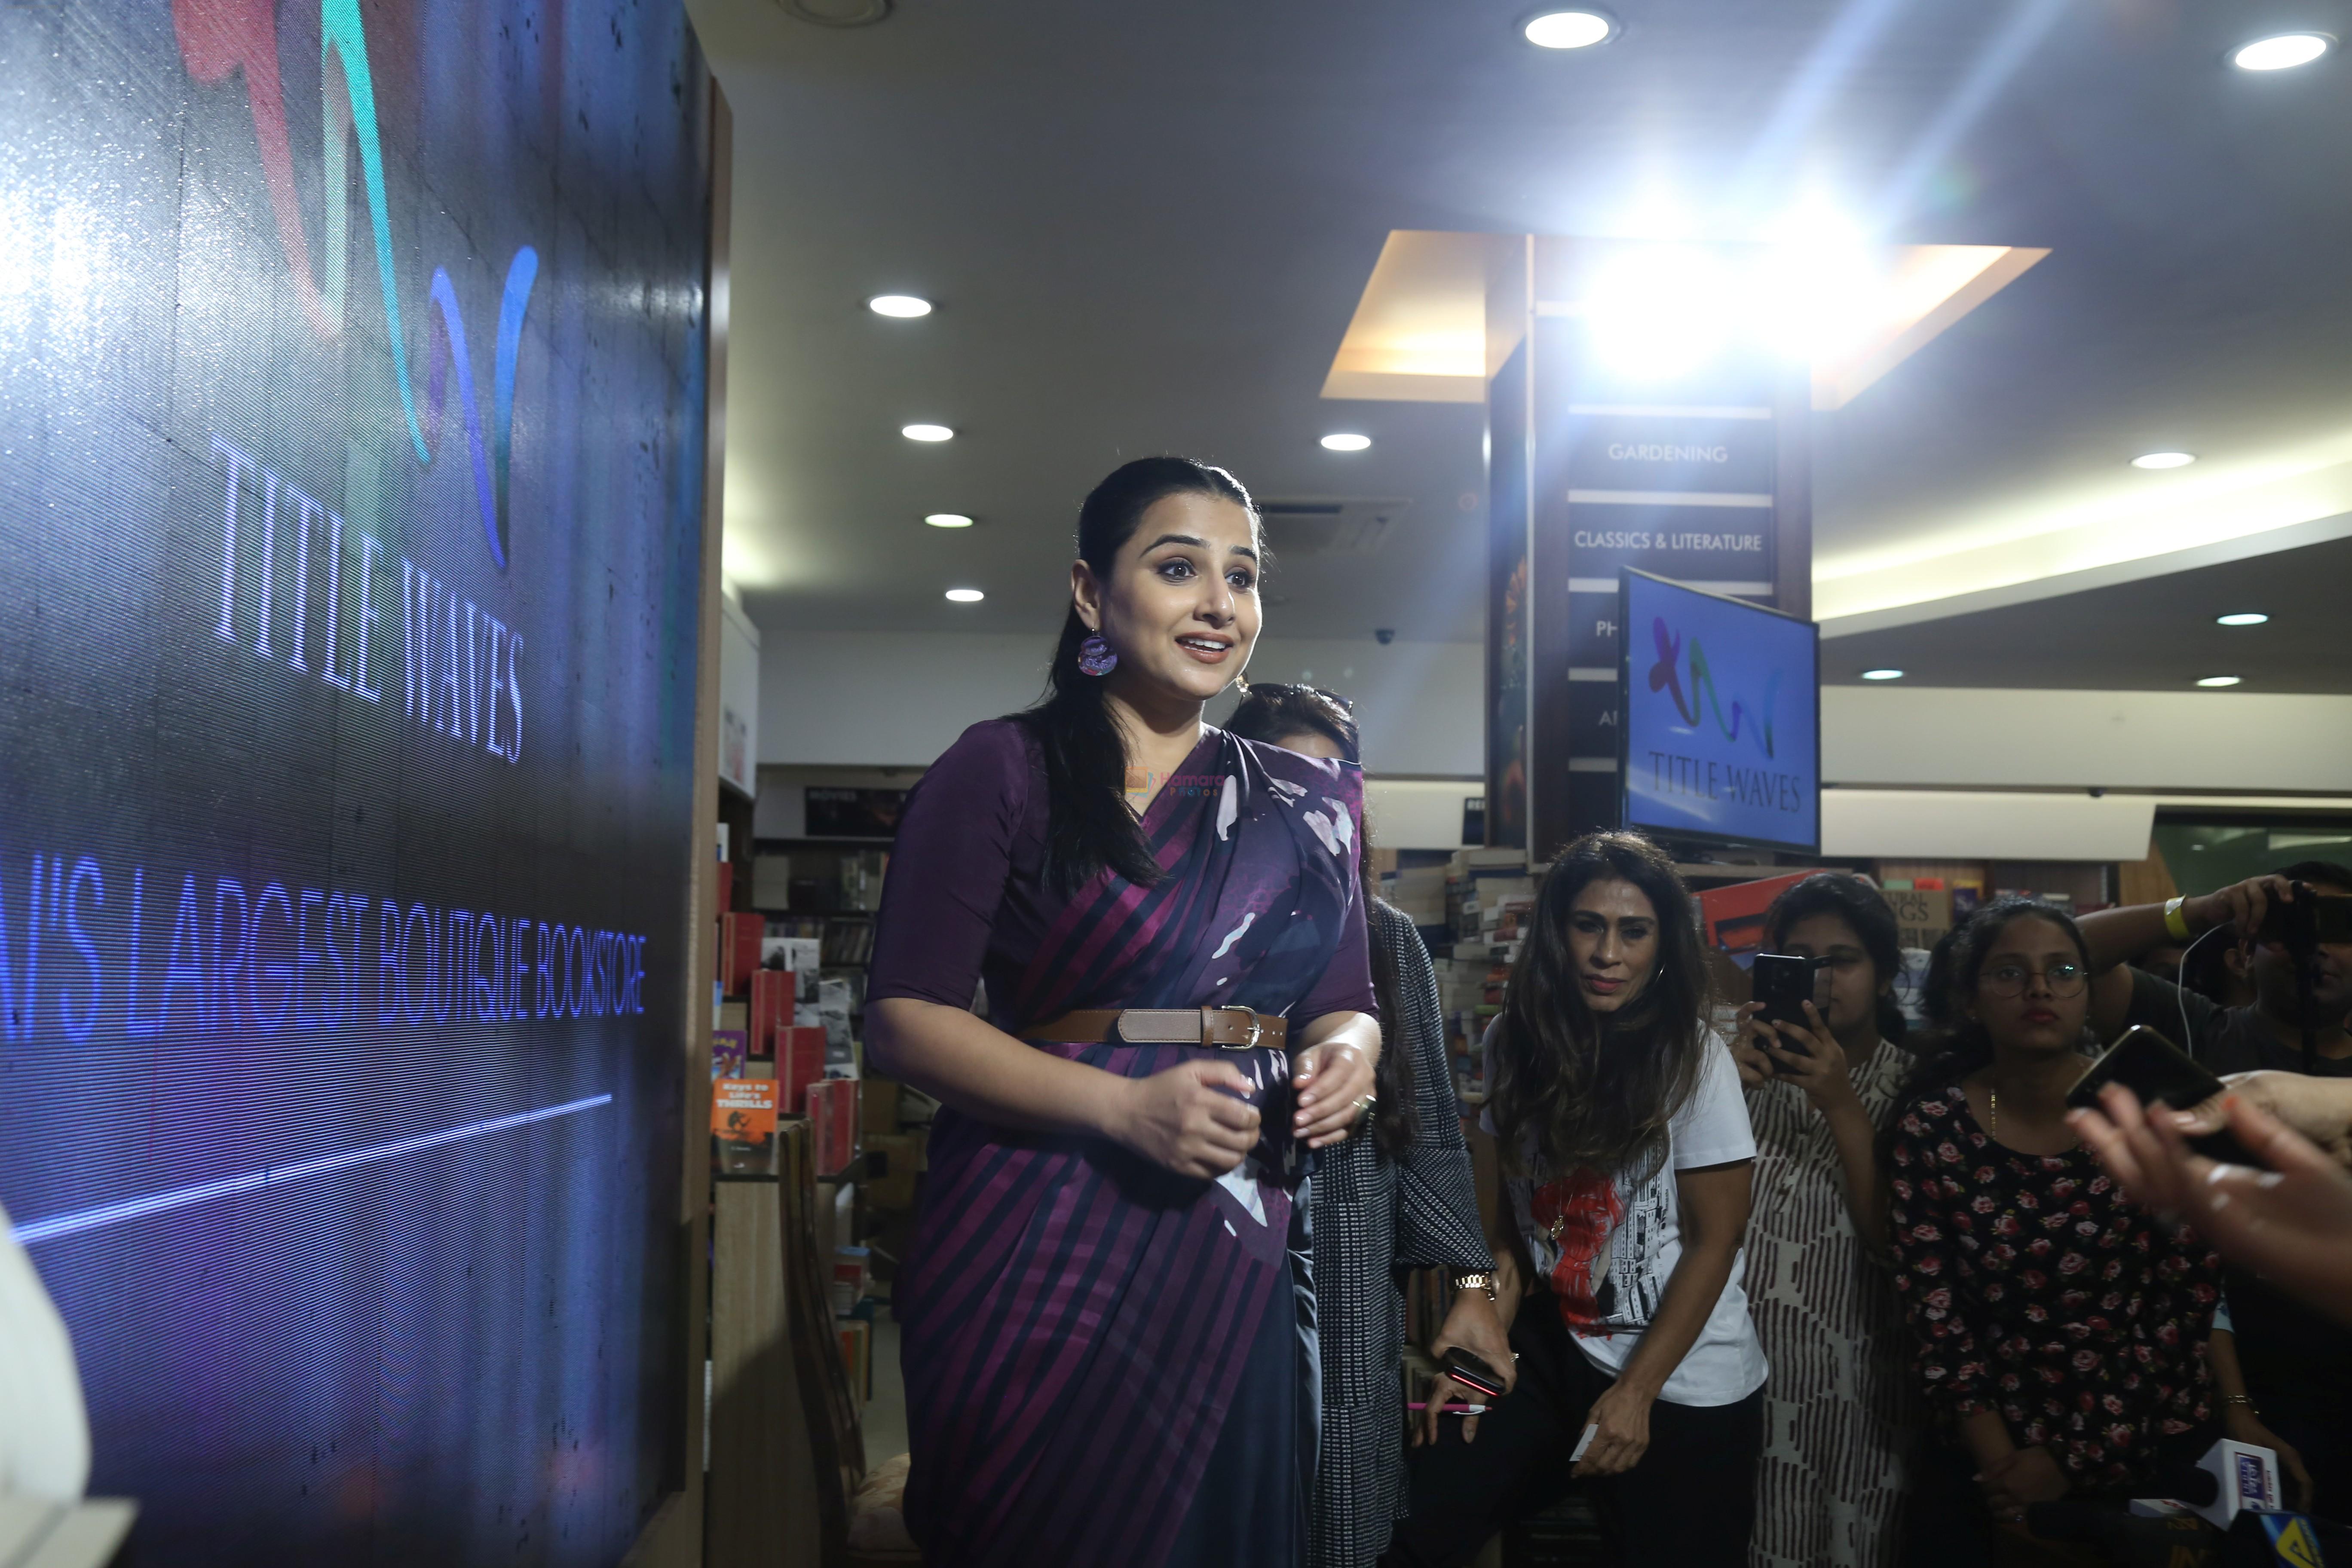 Vidya Balan at the Launch Of Minnie Vaid Book Those Magnificent Women And Their Flying Machines in Title Waves, Bandra on 27th Aug 2019